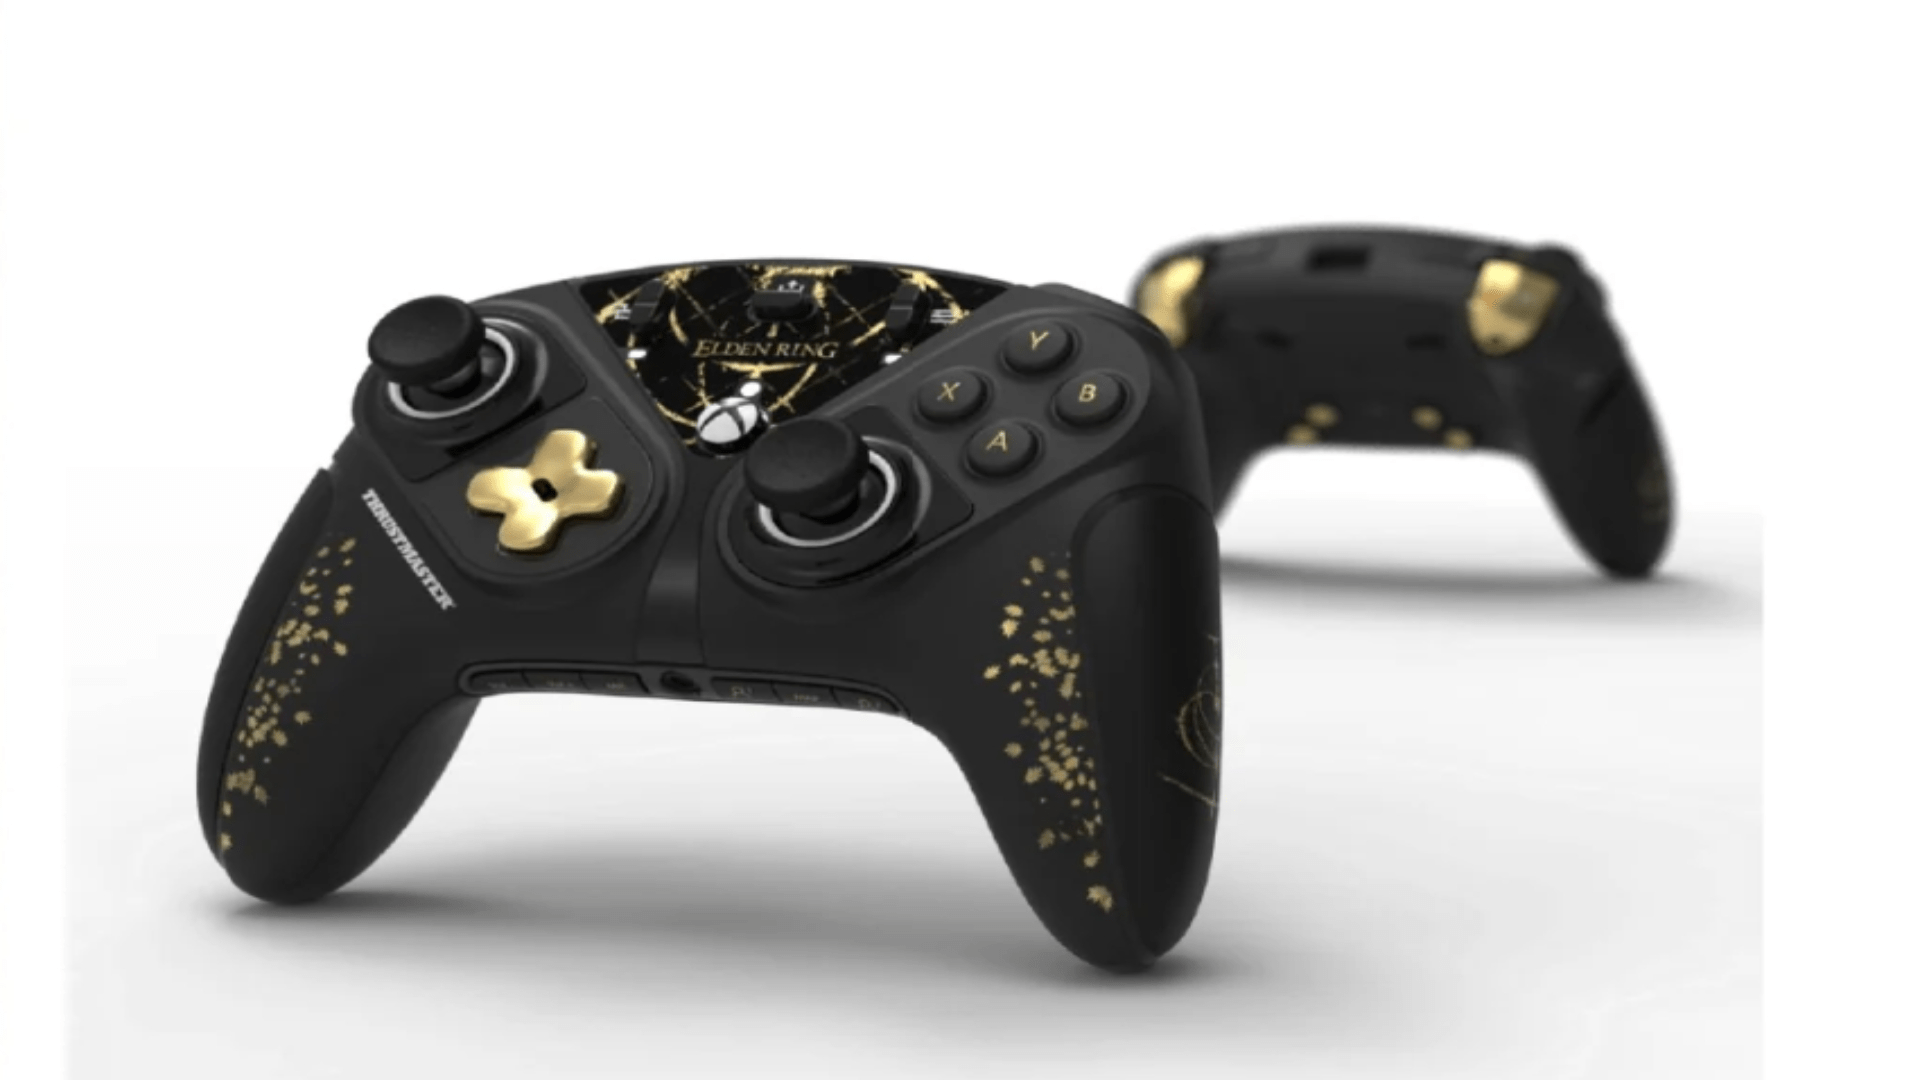 Elden Ring Xbox controller collab between Thrustmaster and Bandai Namco (Picture: Google)